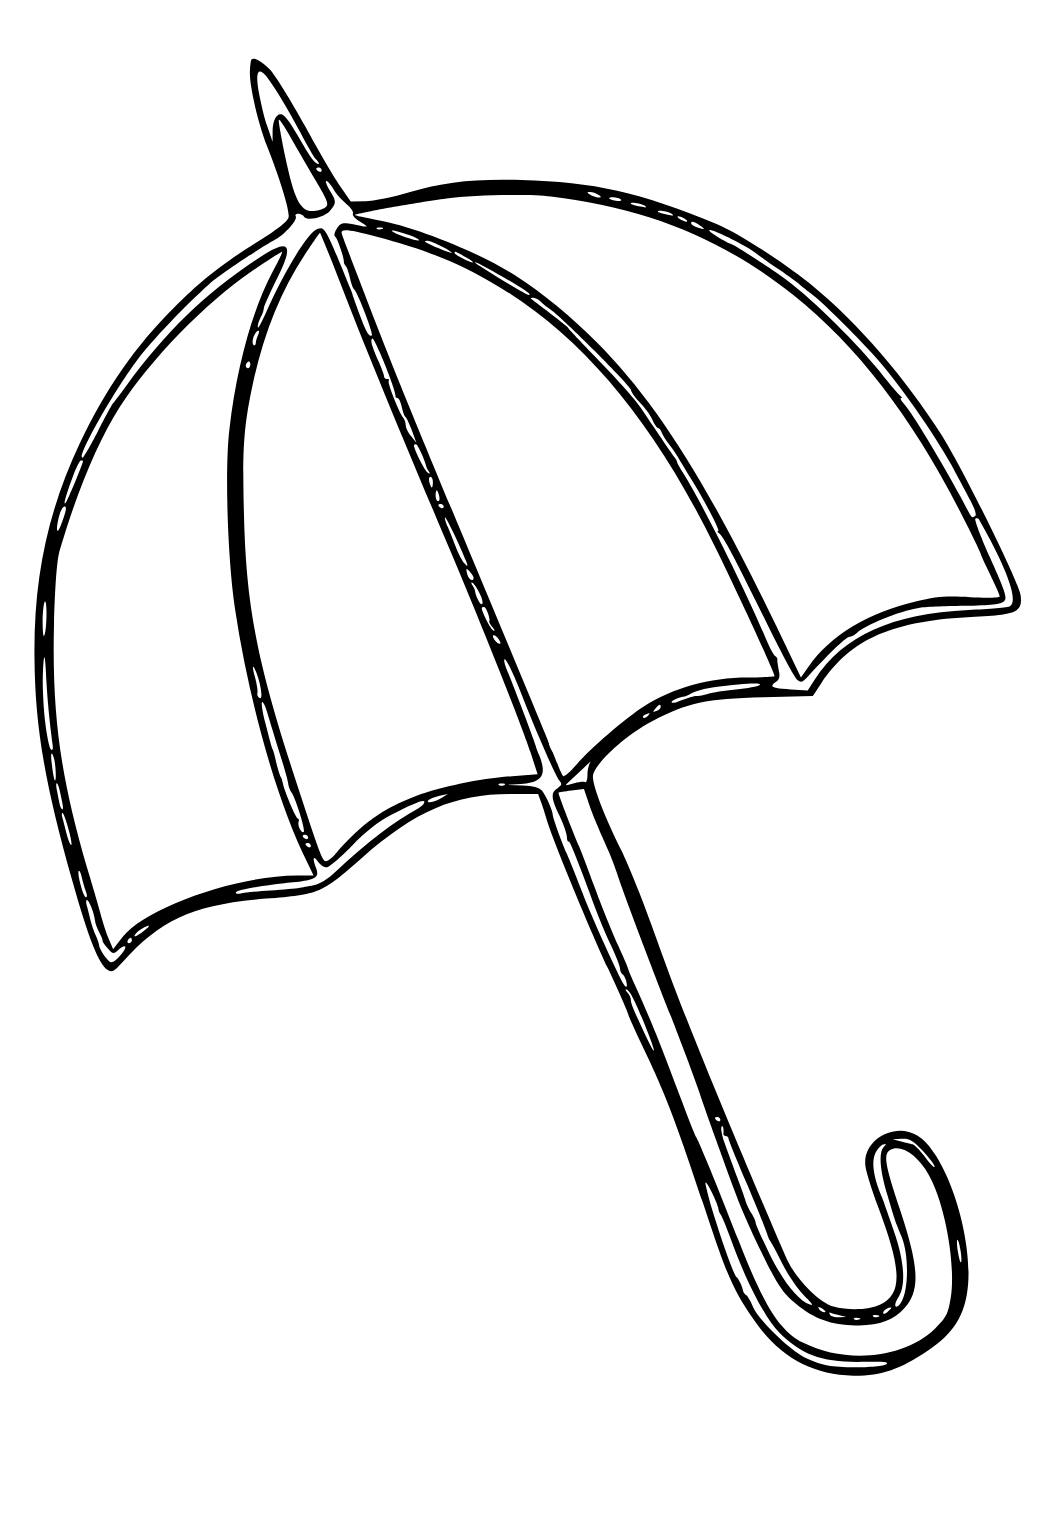 Free Printable Umbrella Pen Coloring Page for Adults and Kids - Lystok.com